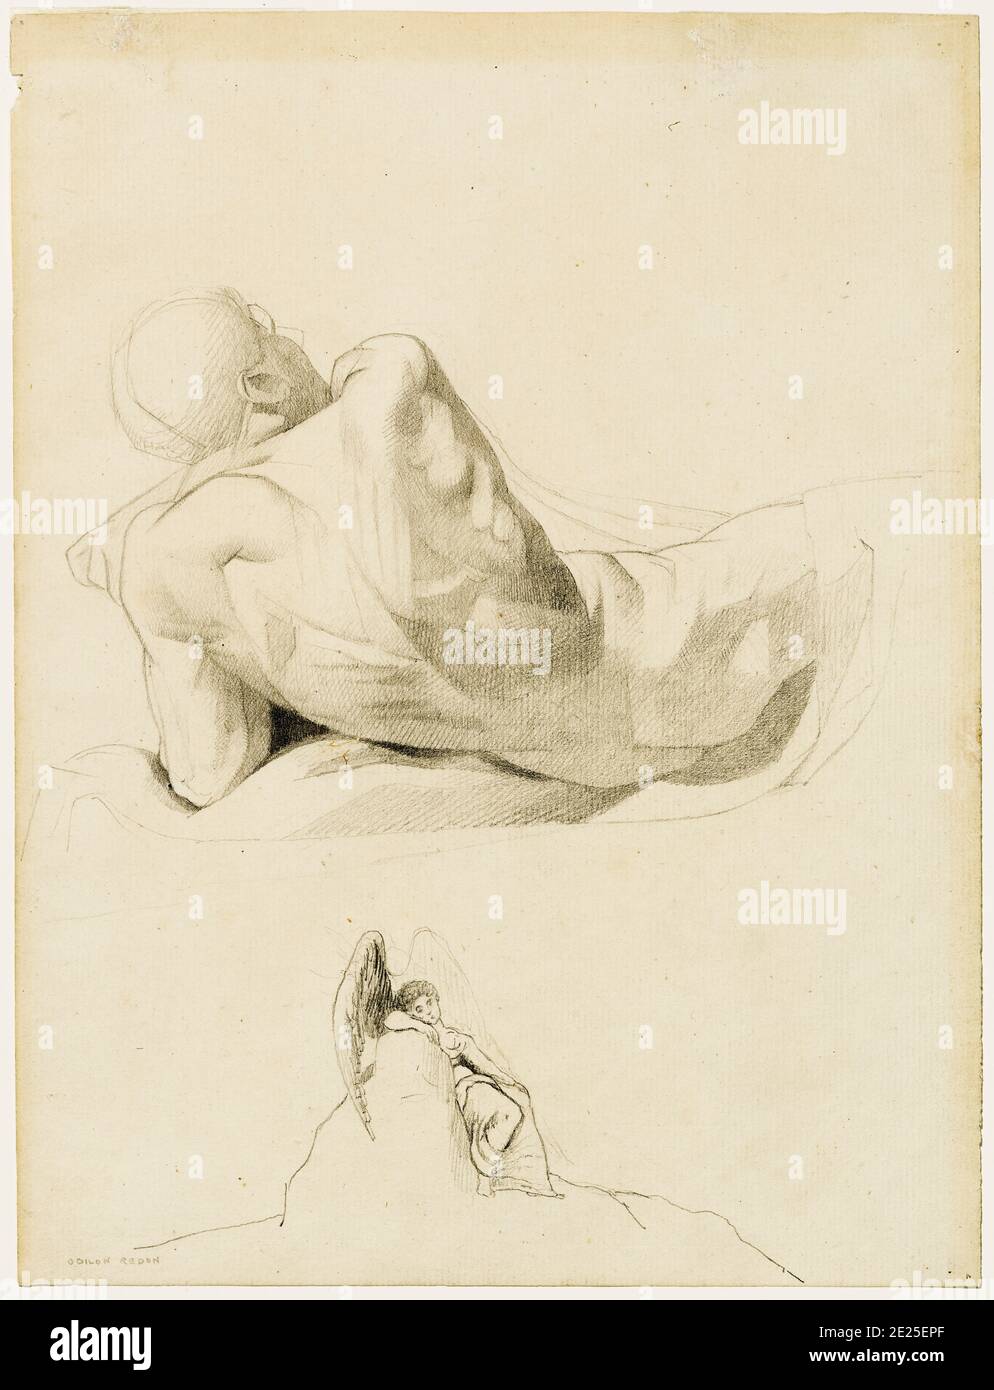 Odilon Redon, Study of a Man's Back and a Melancholy Angel, drawing, 1865 Stock Photo